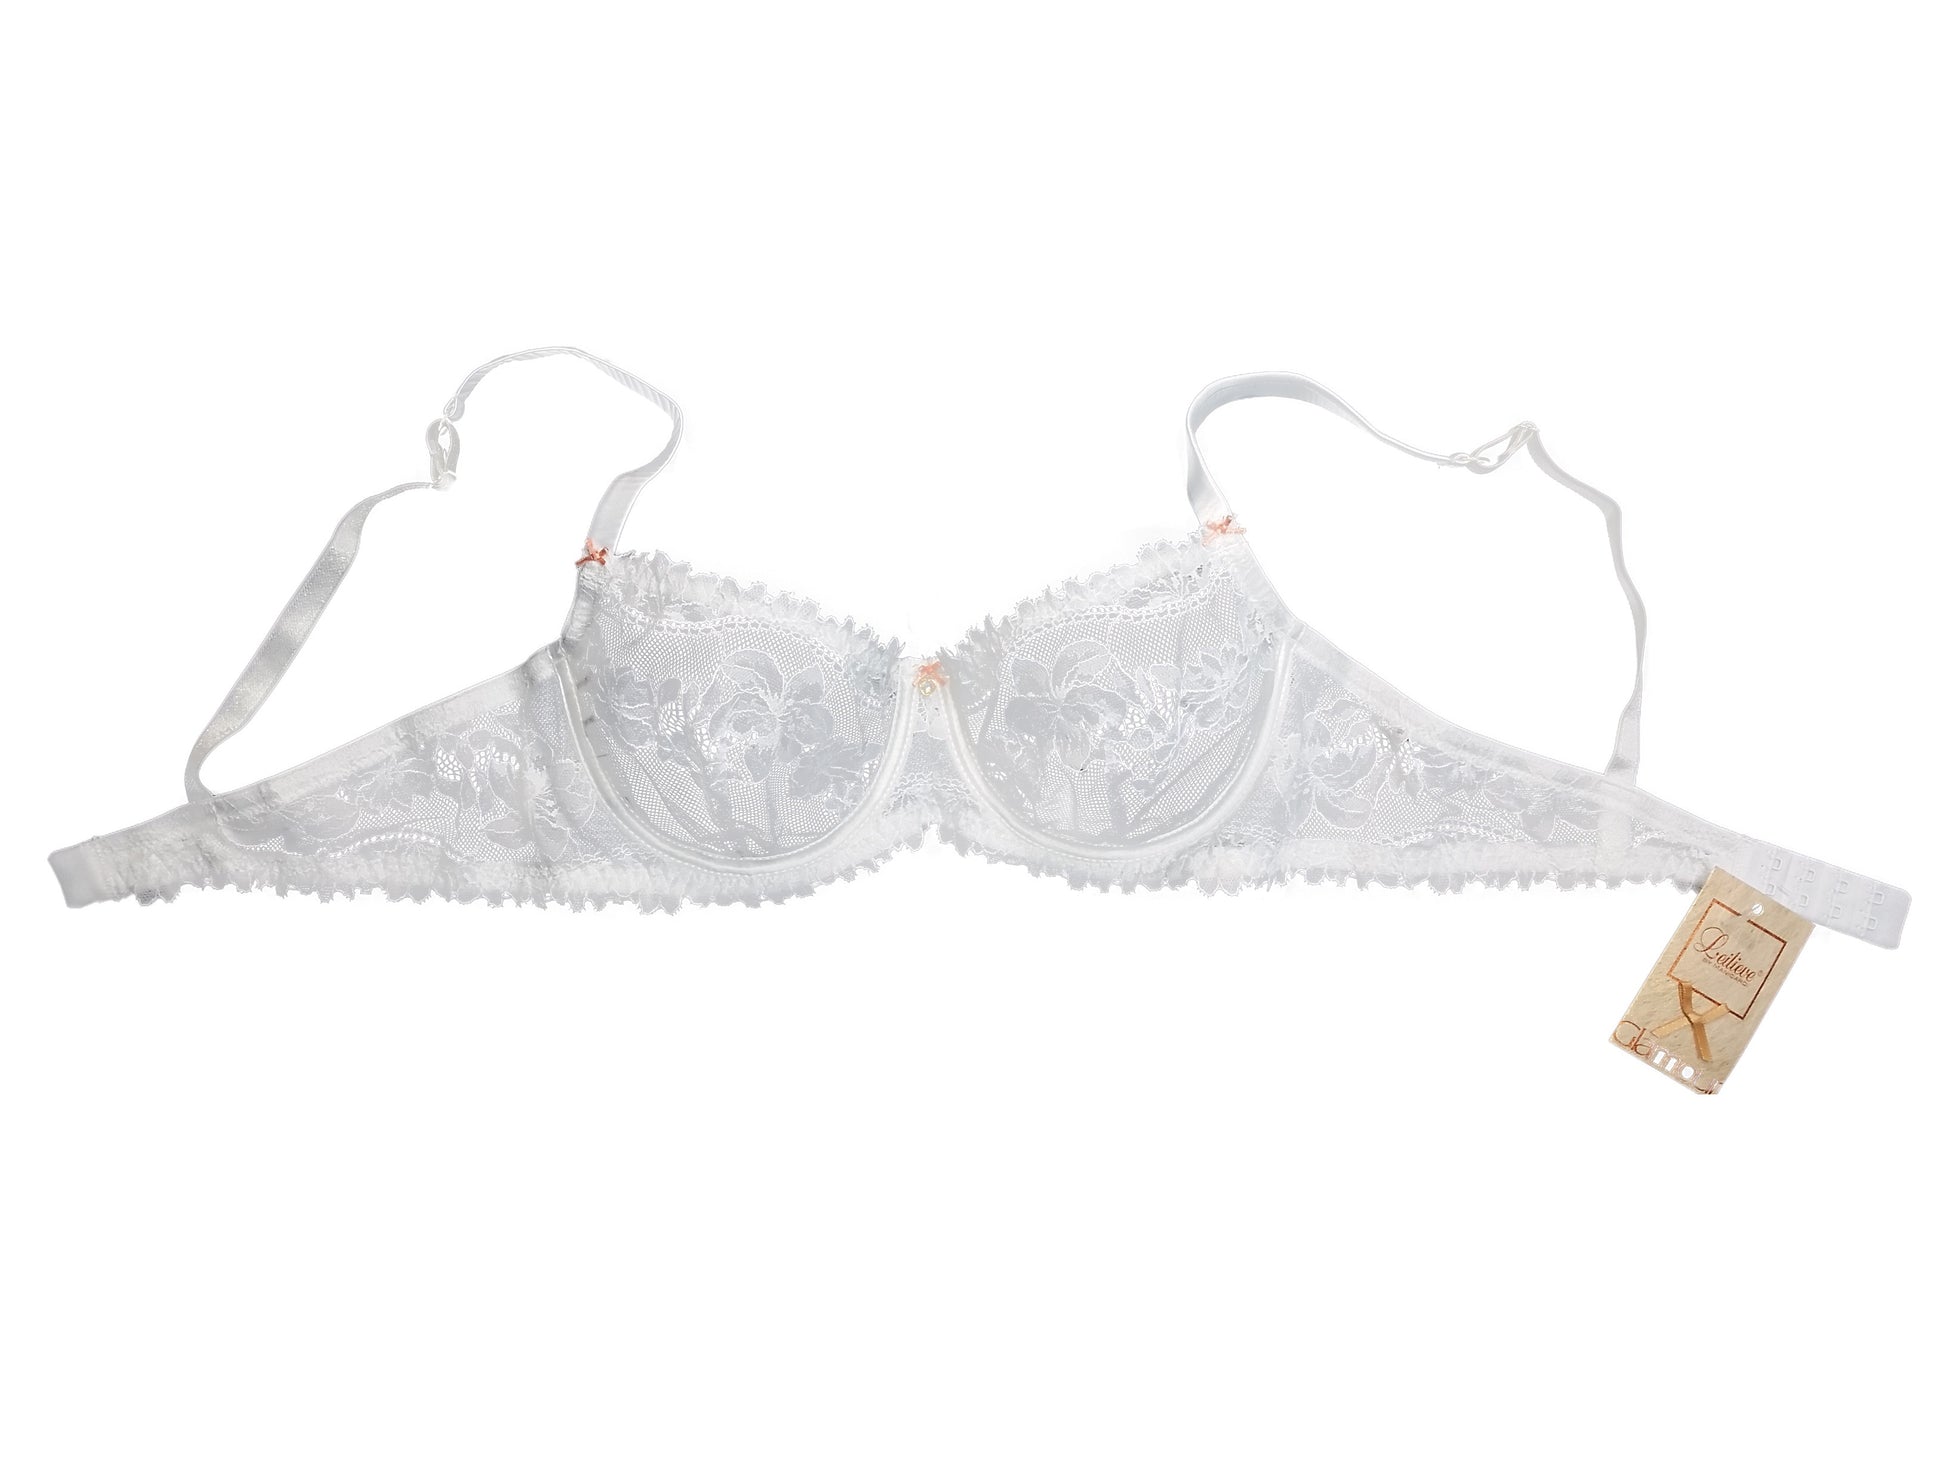 Unlined bra from the Privilege line by Leilieve from Italy at Di Moda Lingerie Toronto.